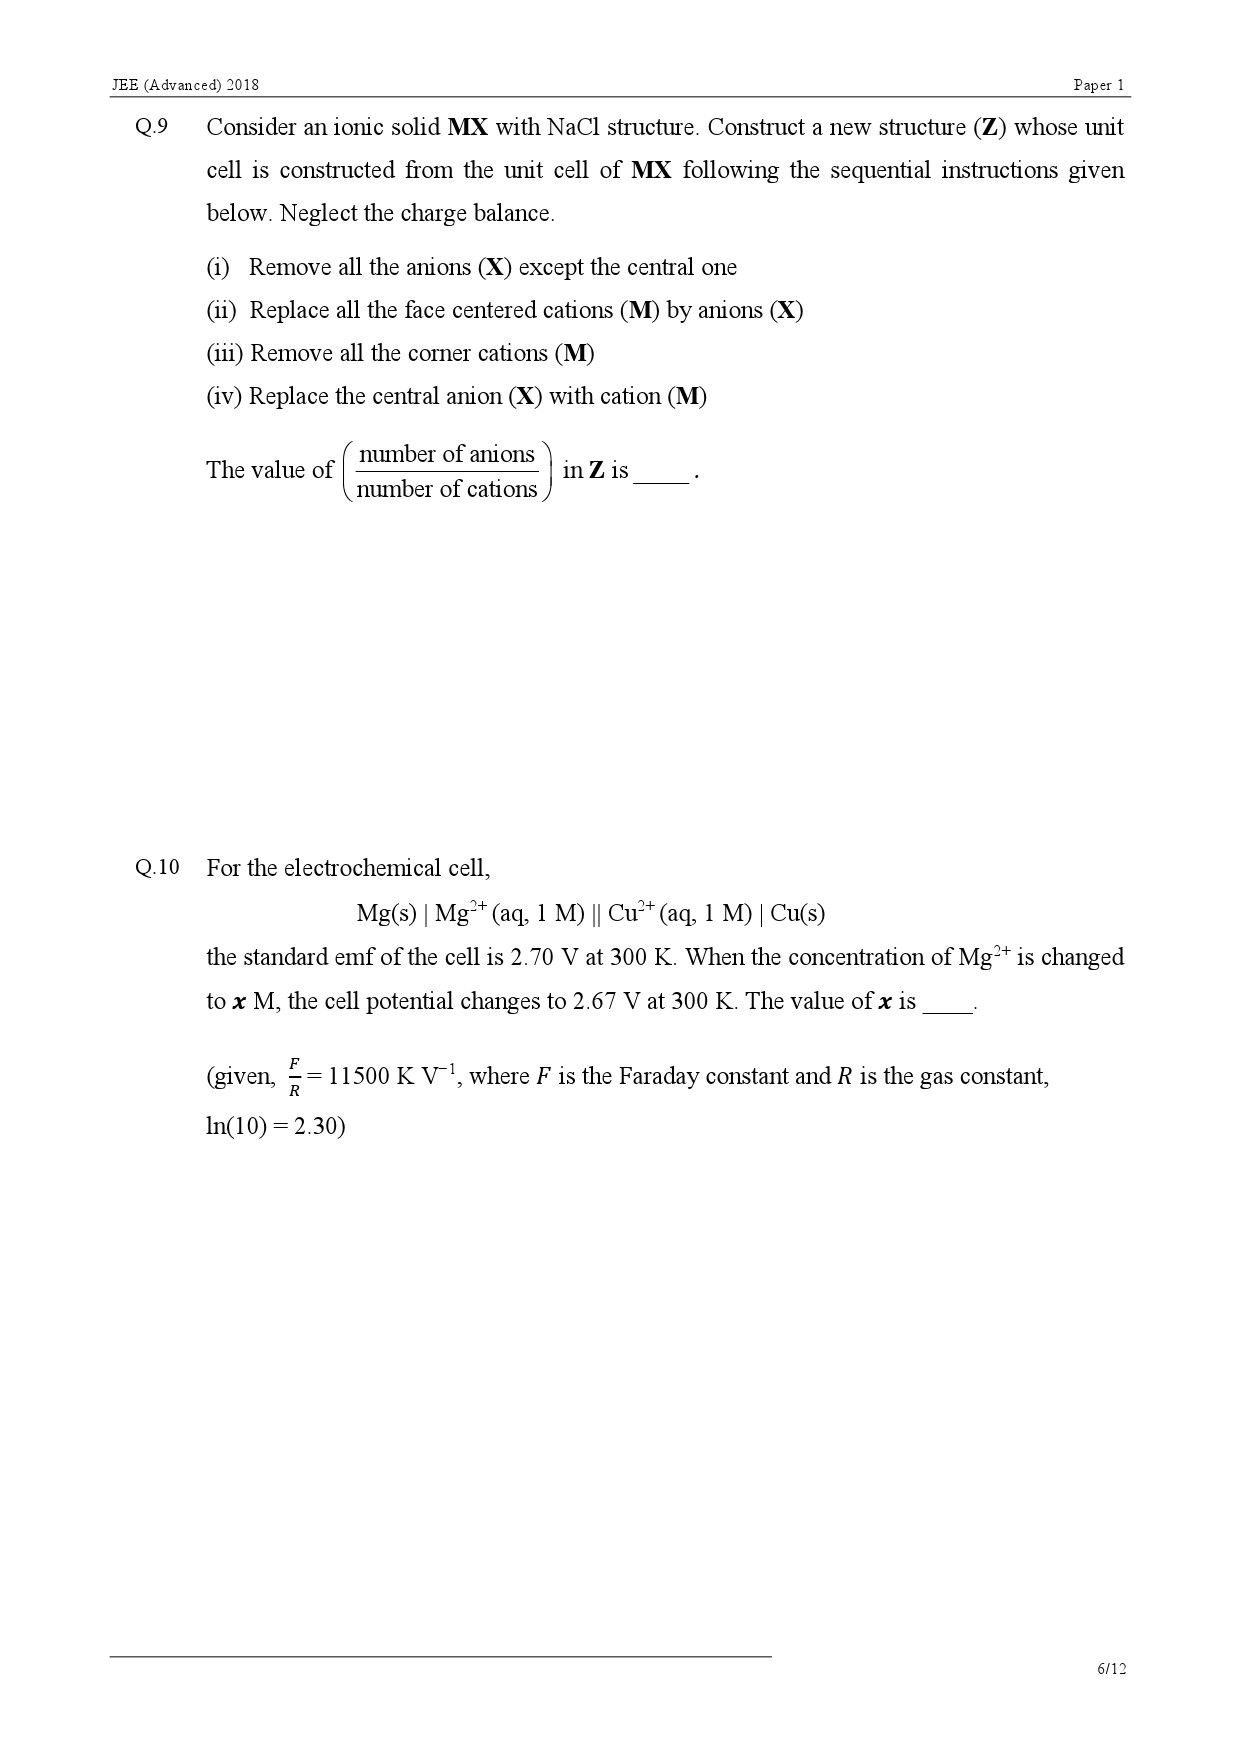 JEE Advanced Exam Question Paper 2018 Paper 1 Chemistry 6